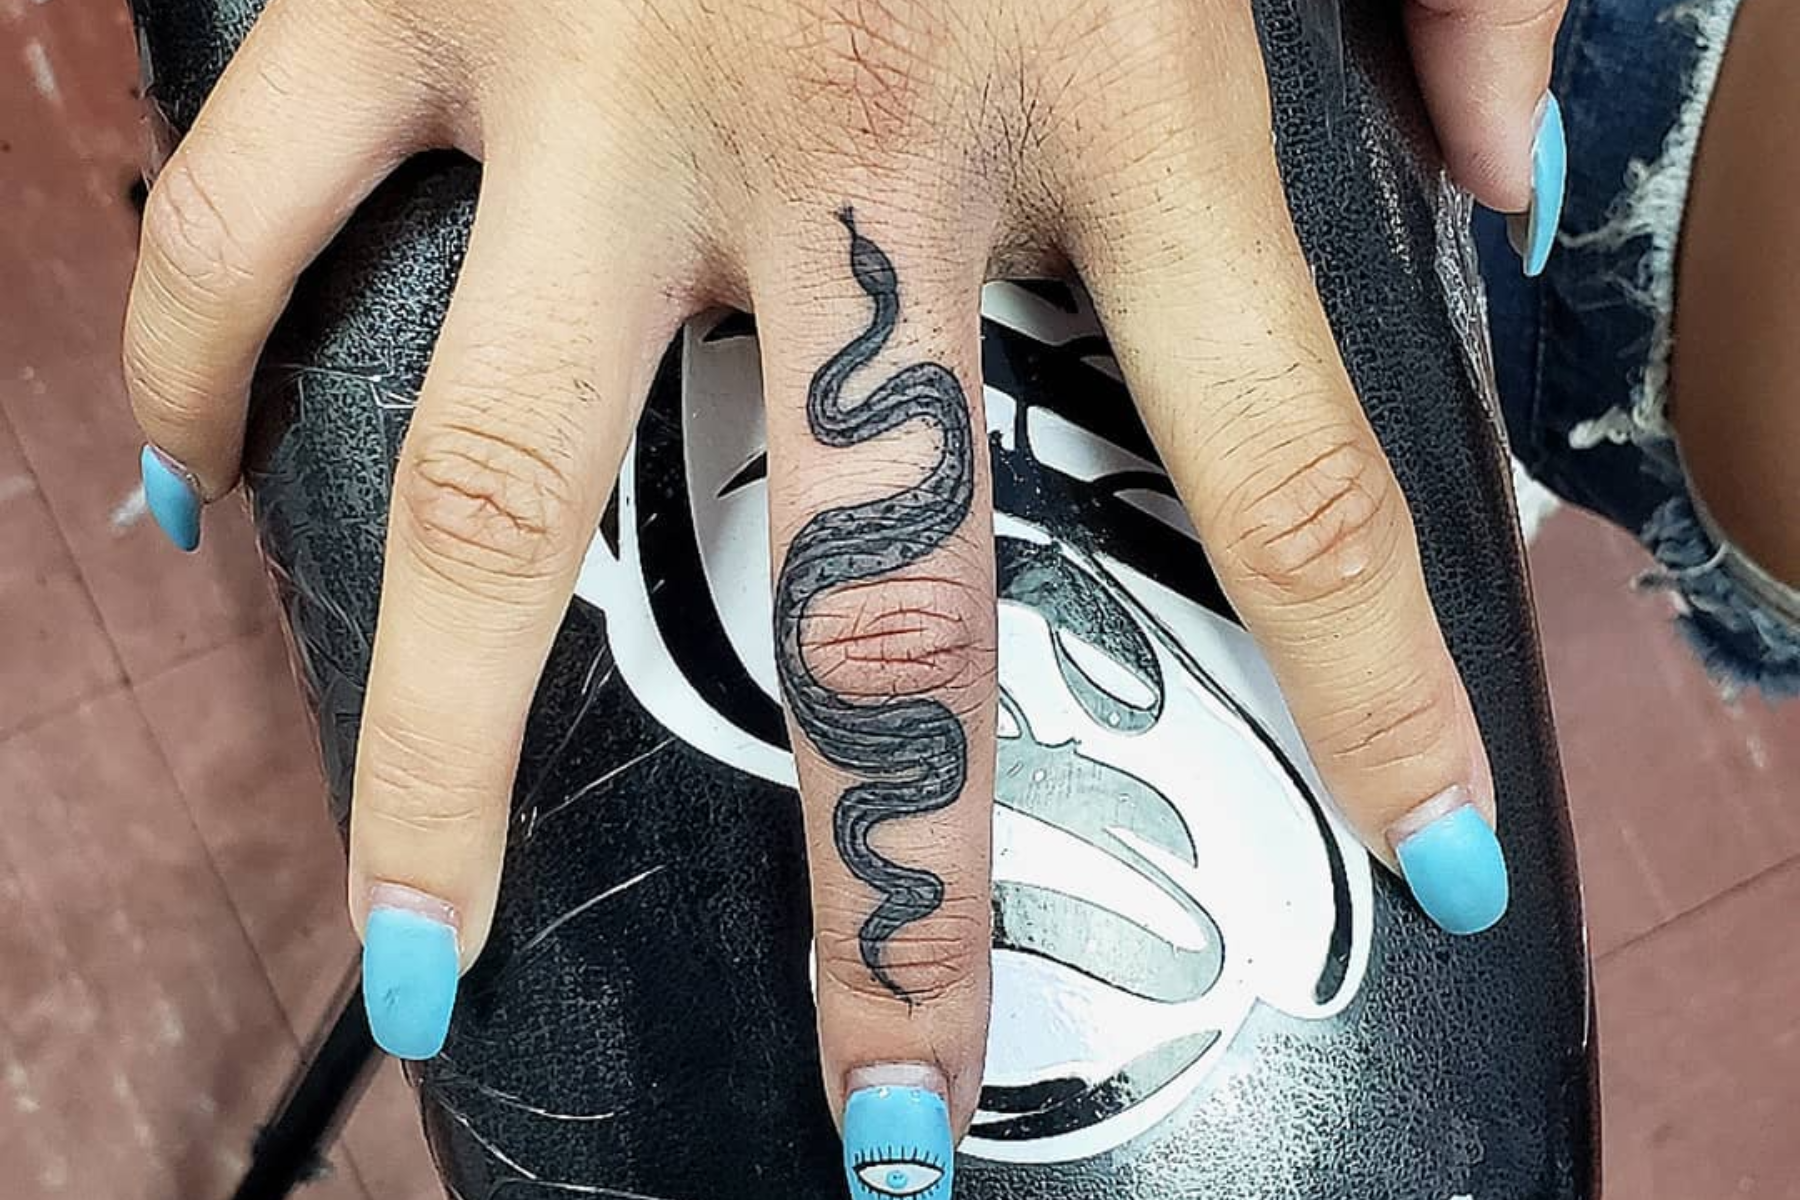 101 Best Snake Finger Tattoo Ideas That Will Blow Your Mind!